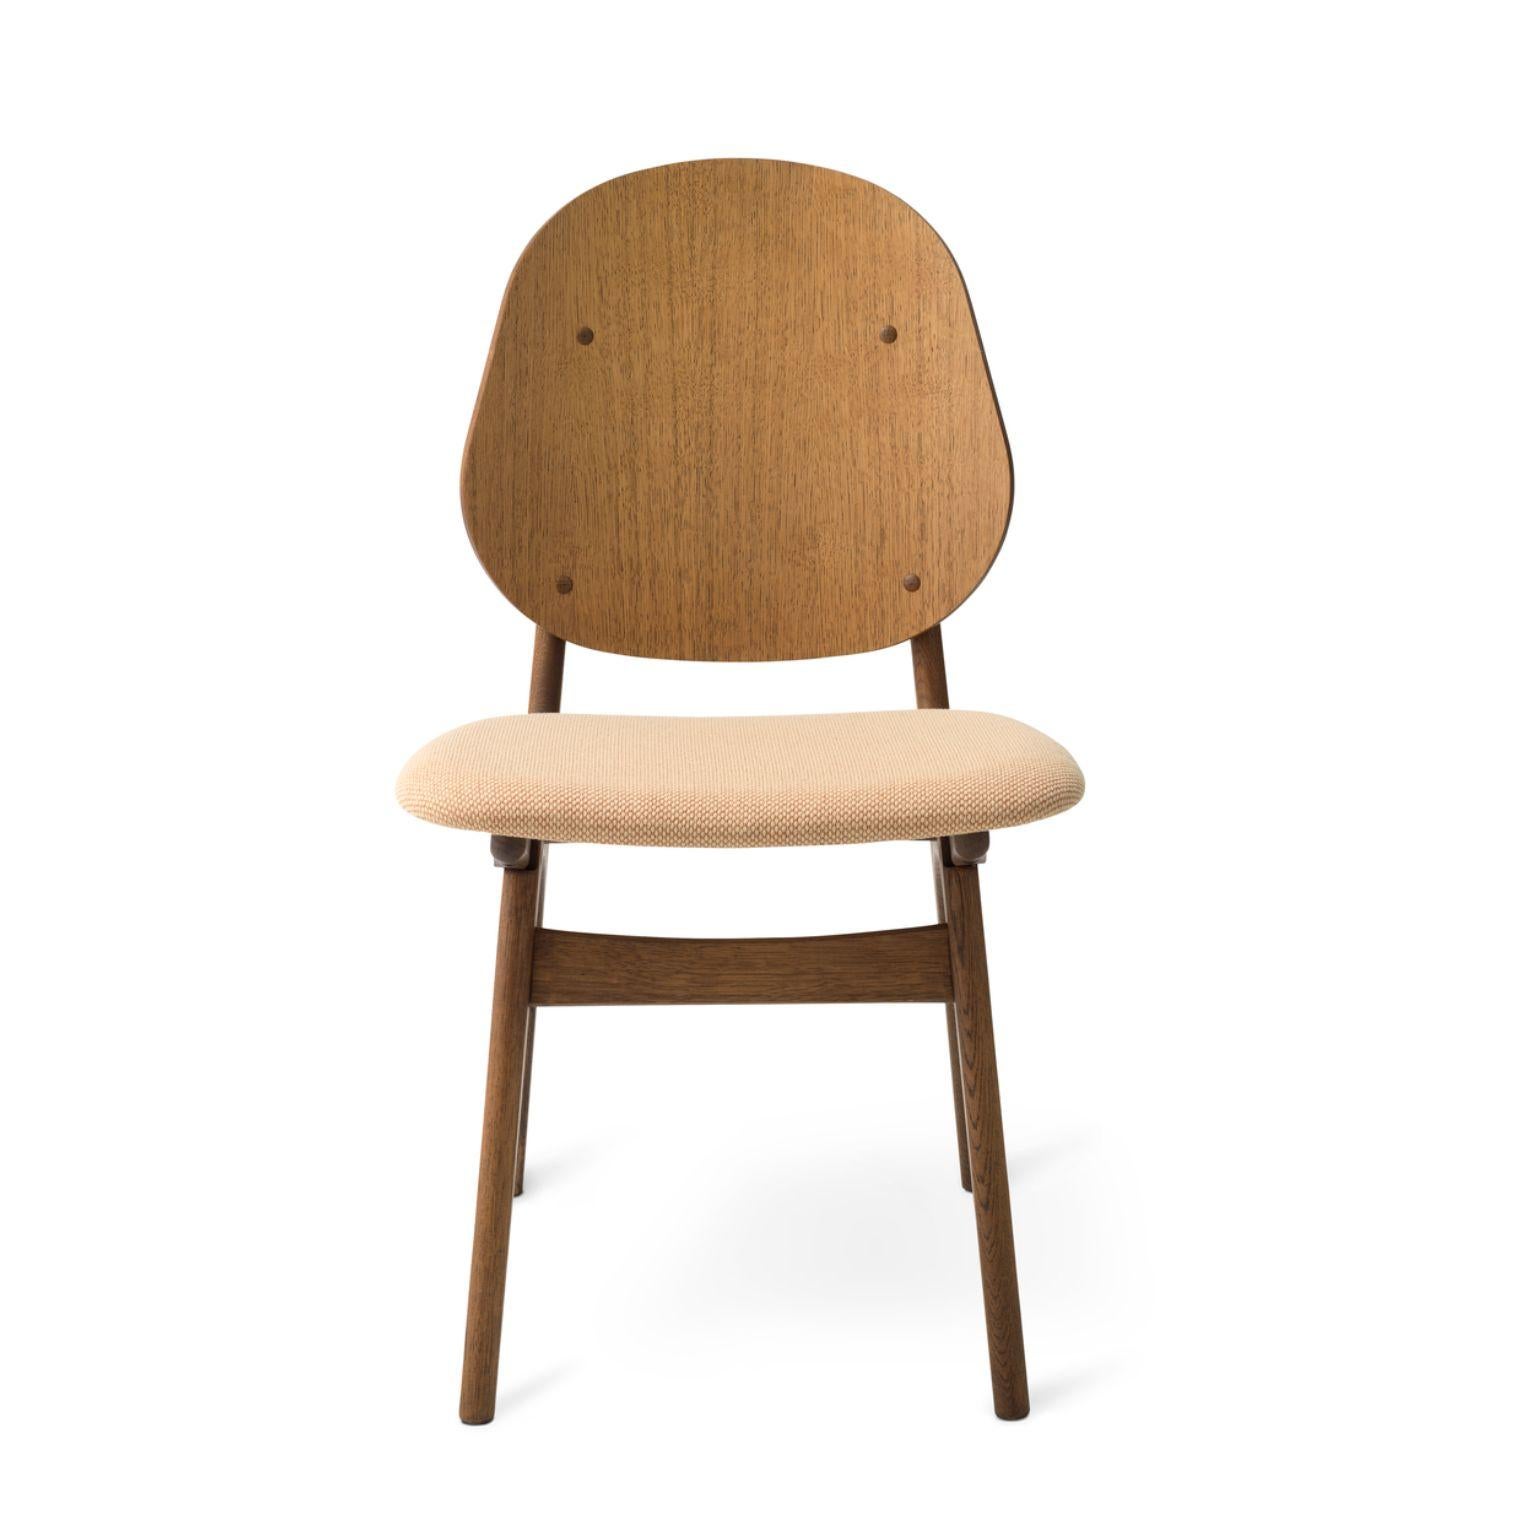 Noble Chair Teak Oiled Oak Butternut by Warm Nordic
Dimensions: D55 x W47 x H 85 cm
Material: Teak oiled solid oak, Veneer seat and back, Textile upholstery.
Weight: 7.5 kg
Also available in different colours and finishes. Please contact